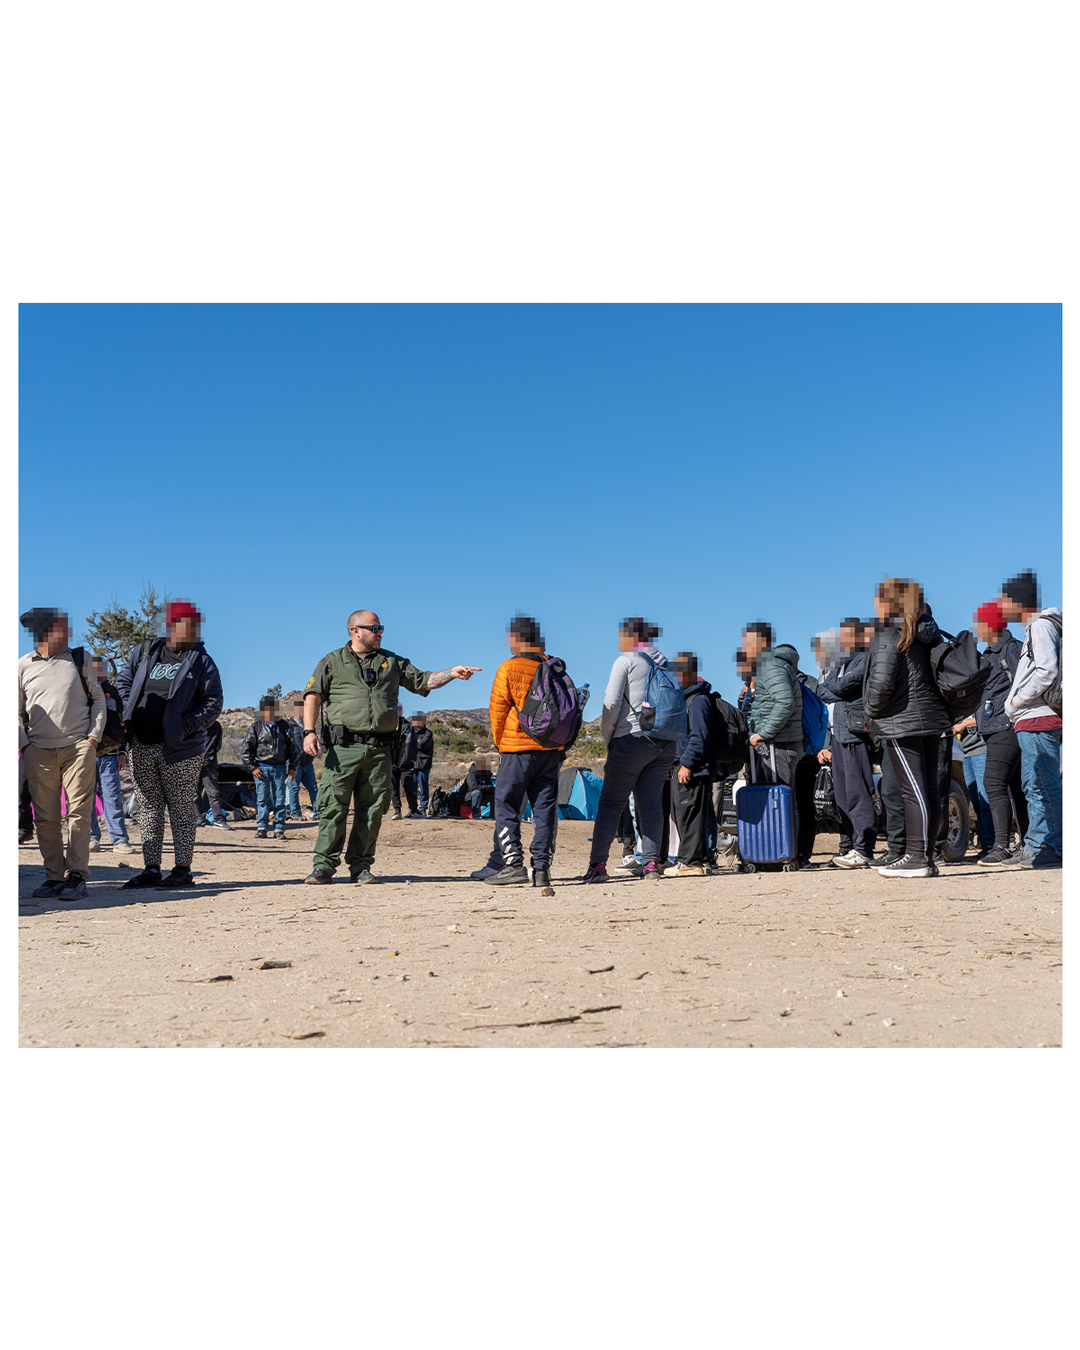 A Border Patrol agent stands in the center of a group; he is pointing his finger directly at one migrant man, while other migrants on all sides of the agent look on.